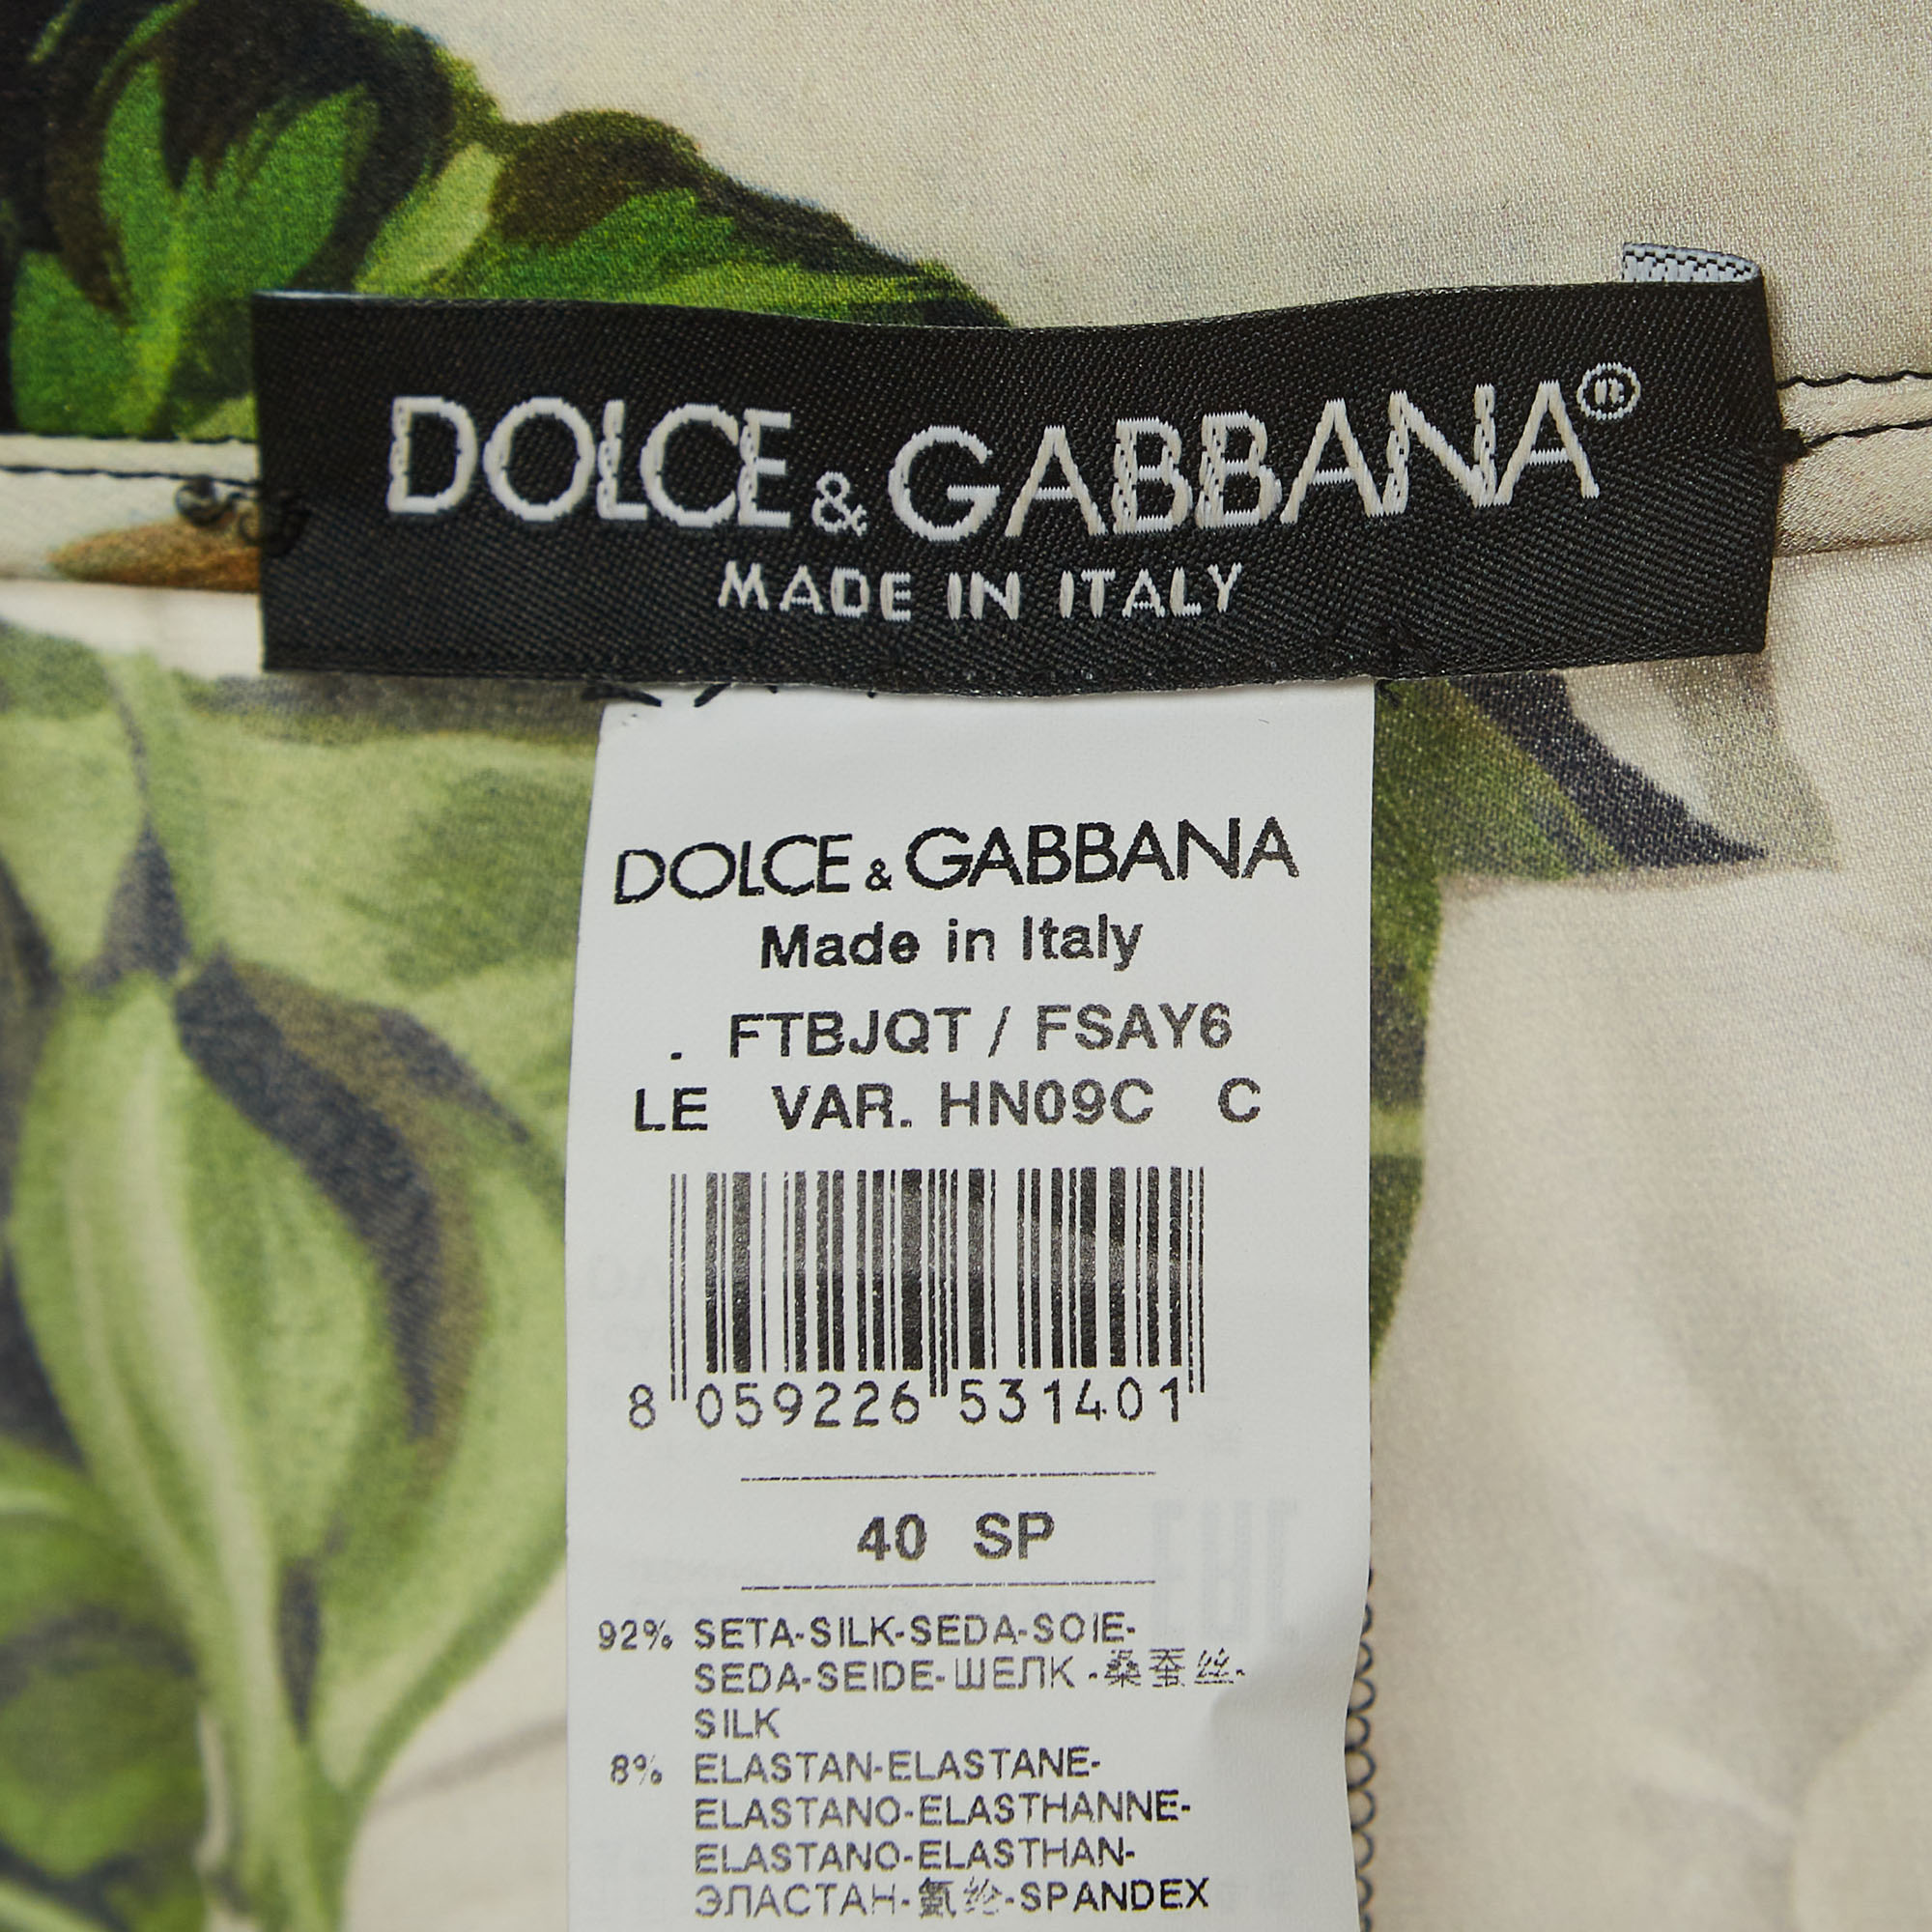 Dolce & Gabbana Multicolor Floral Printed Silk Trousers S